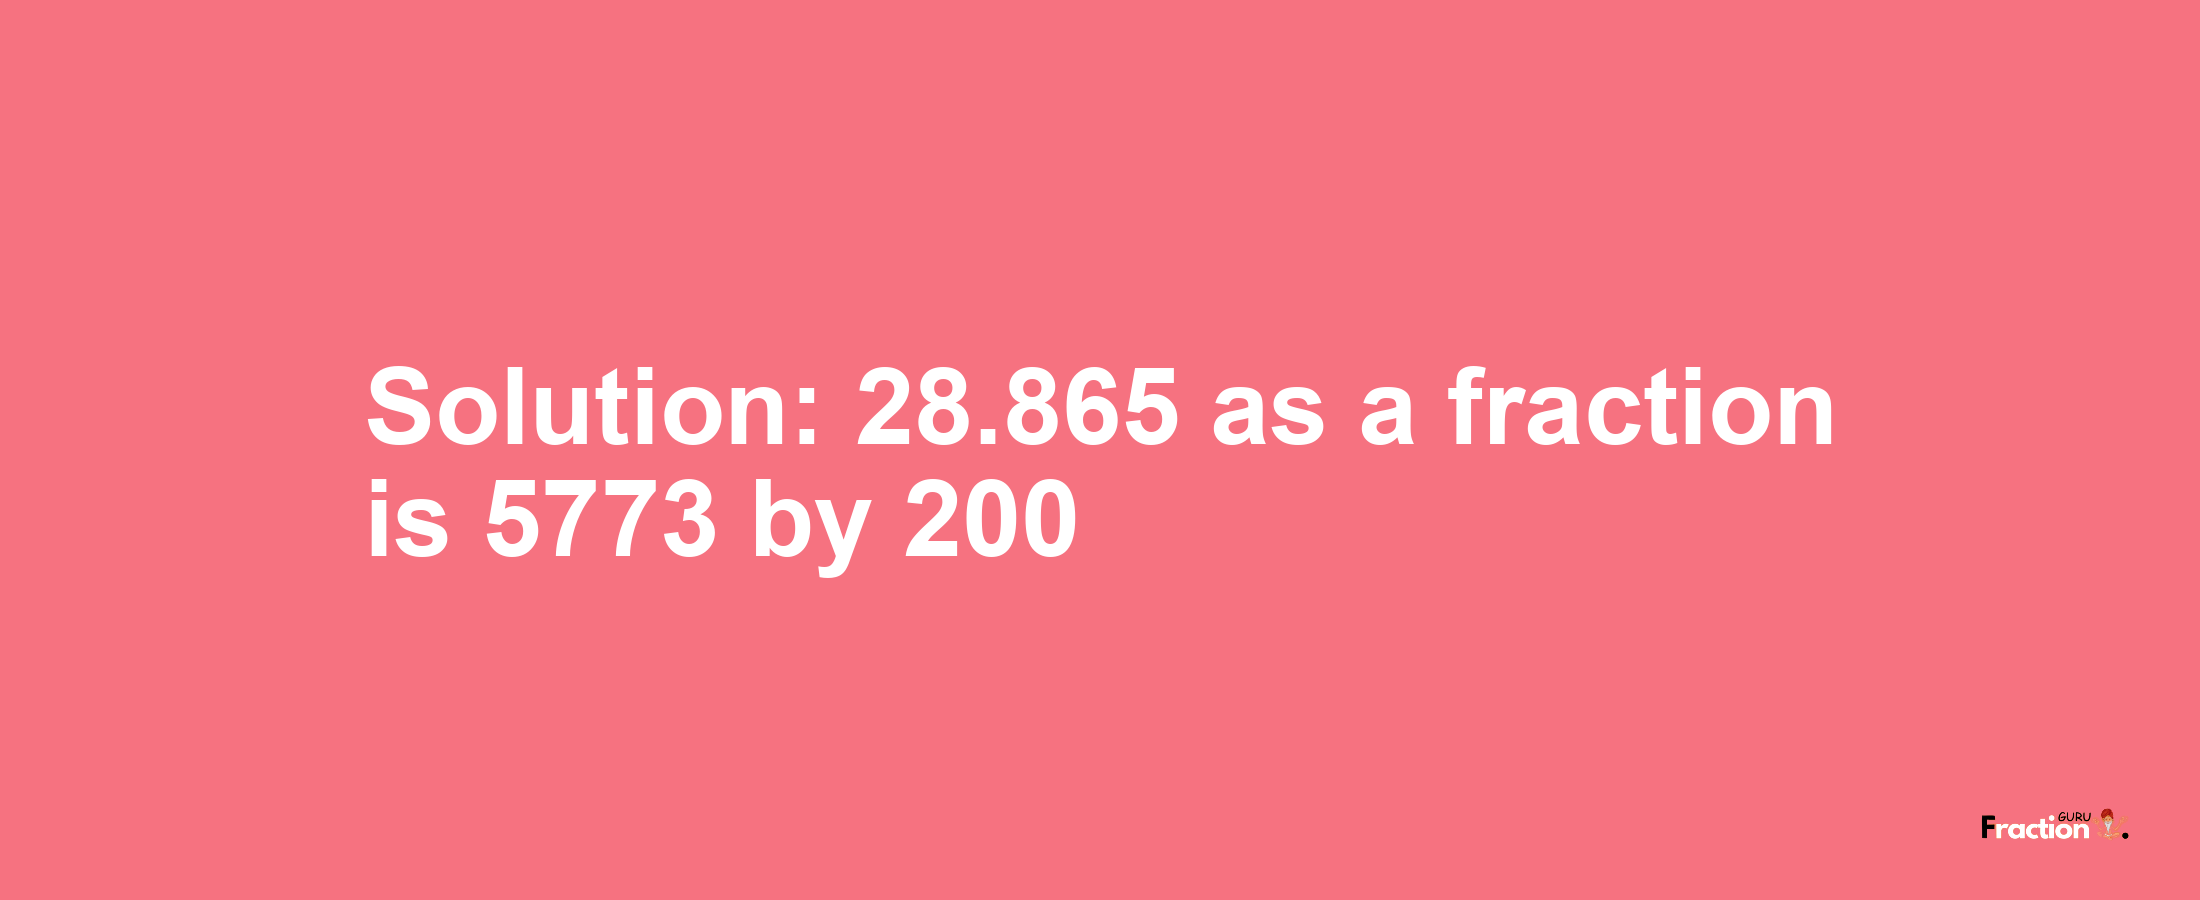 Solution:28.865 as a fraction is 5773/200